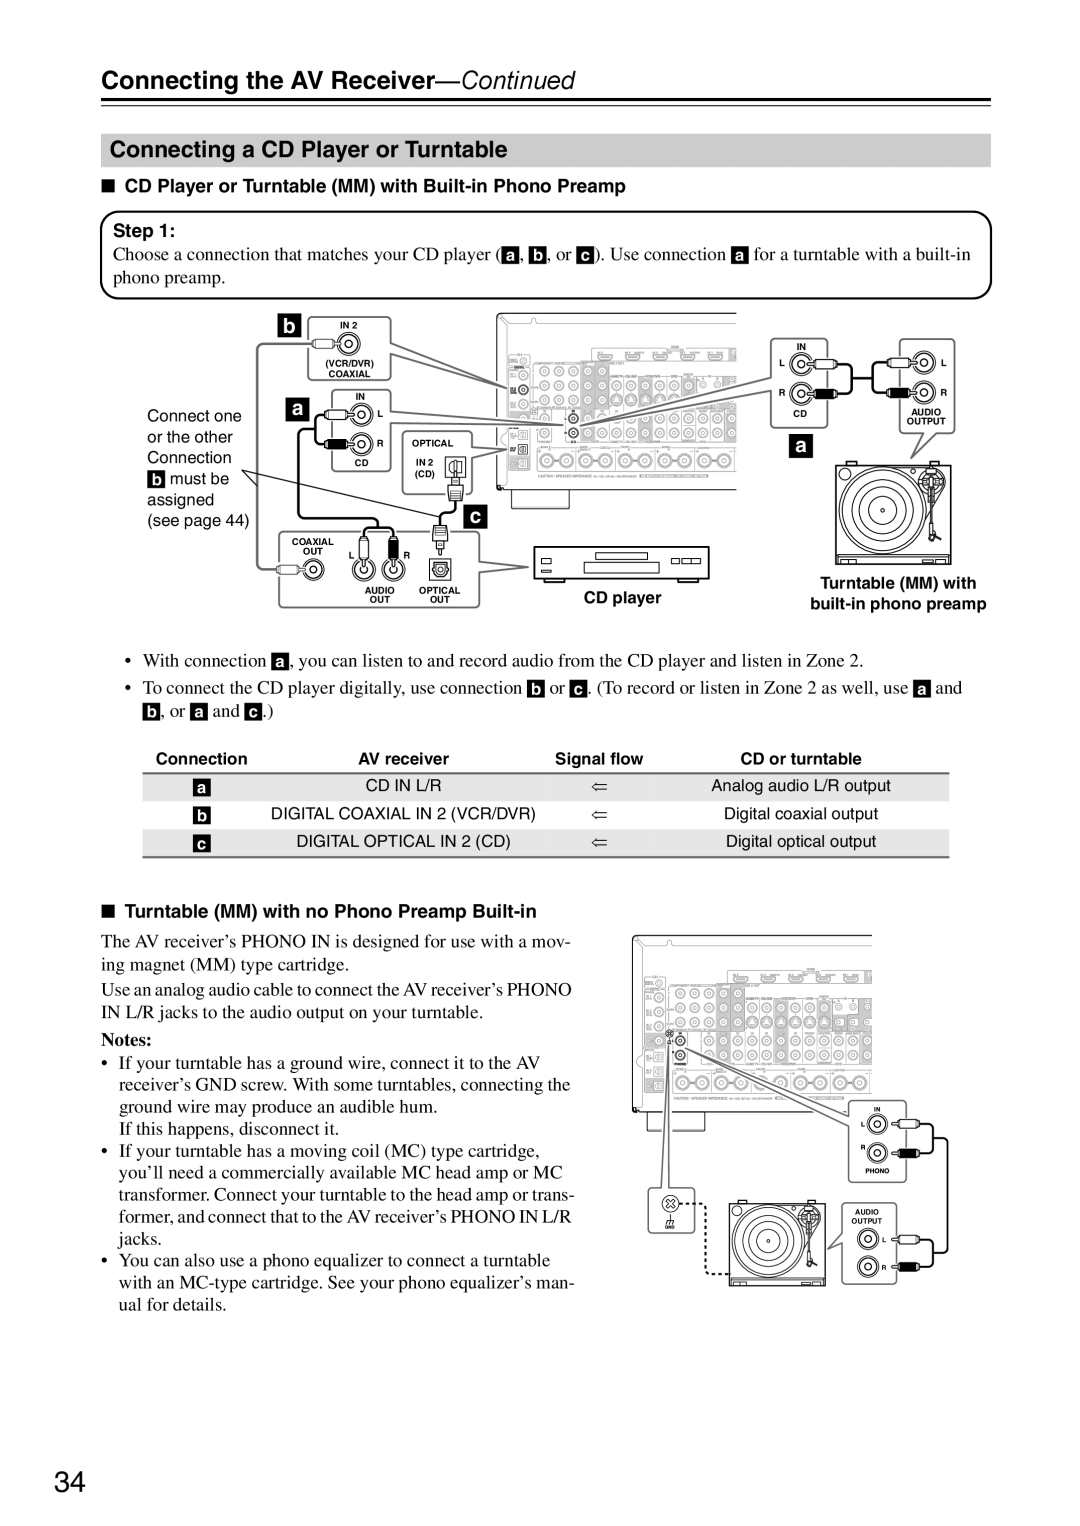 Onkyo DTR-7.9 instruction manual Connecting a CD Player or Turntable, Connecting the AV Receiver—Continued, Step 